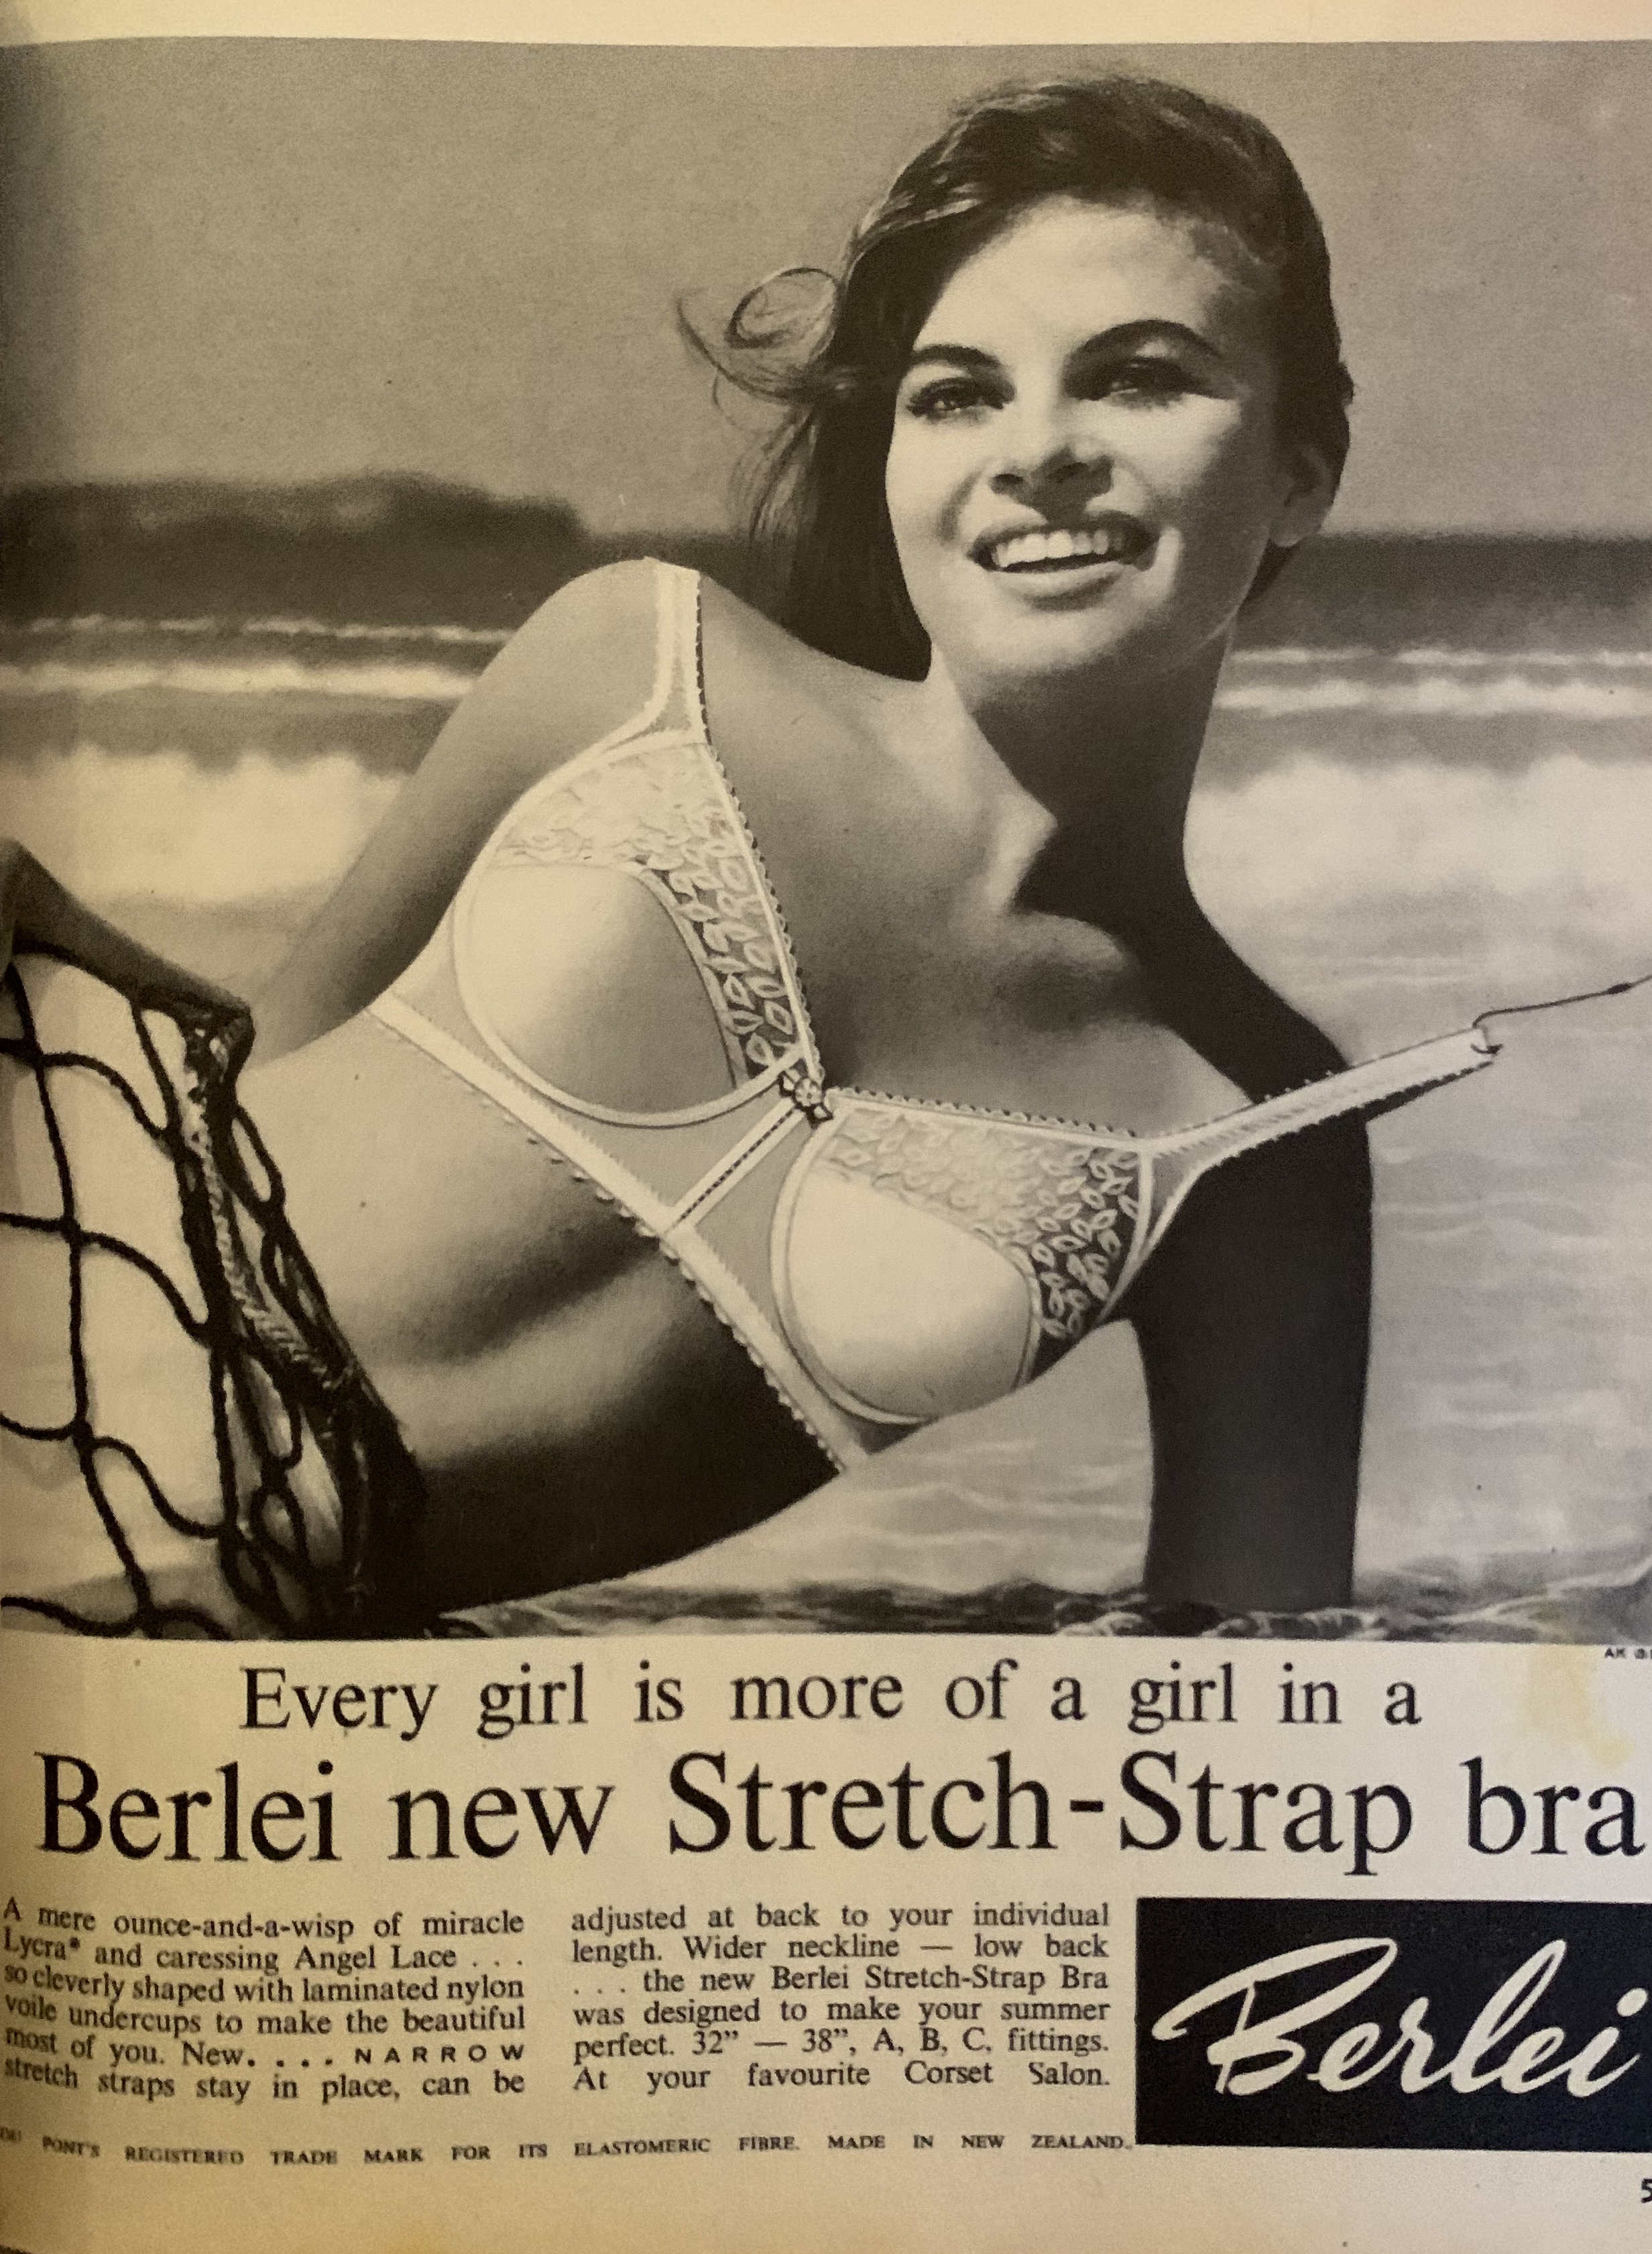 70s Fashion on X: How to be more of a girl 🤔 @BerleiUK #1970s